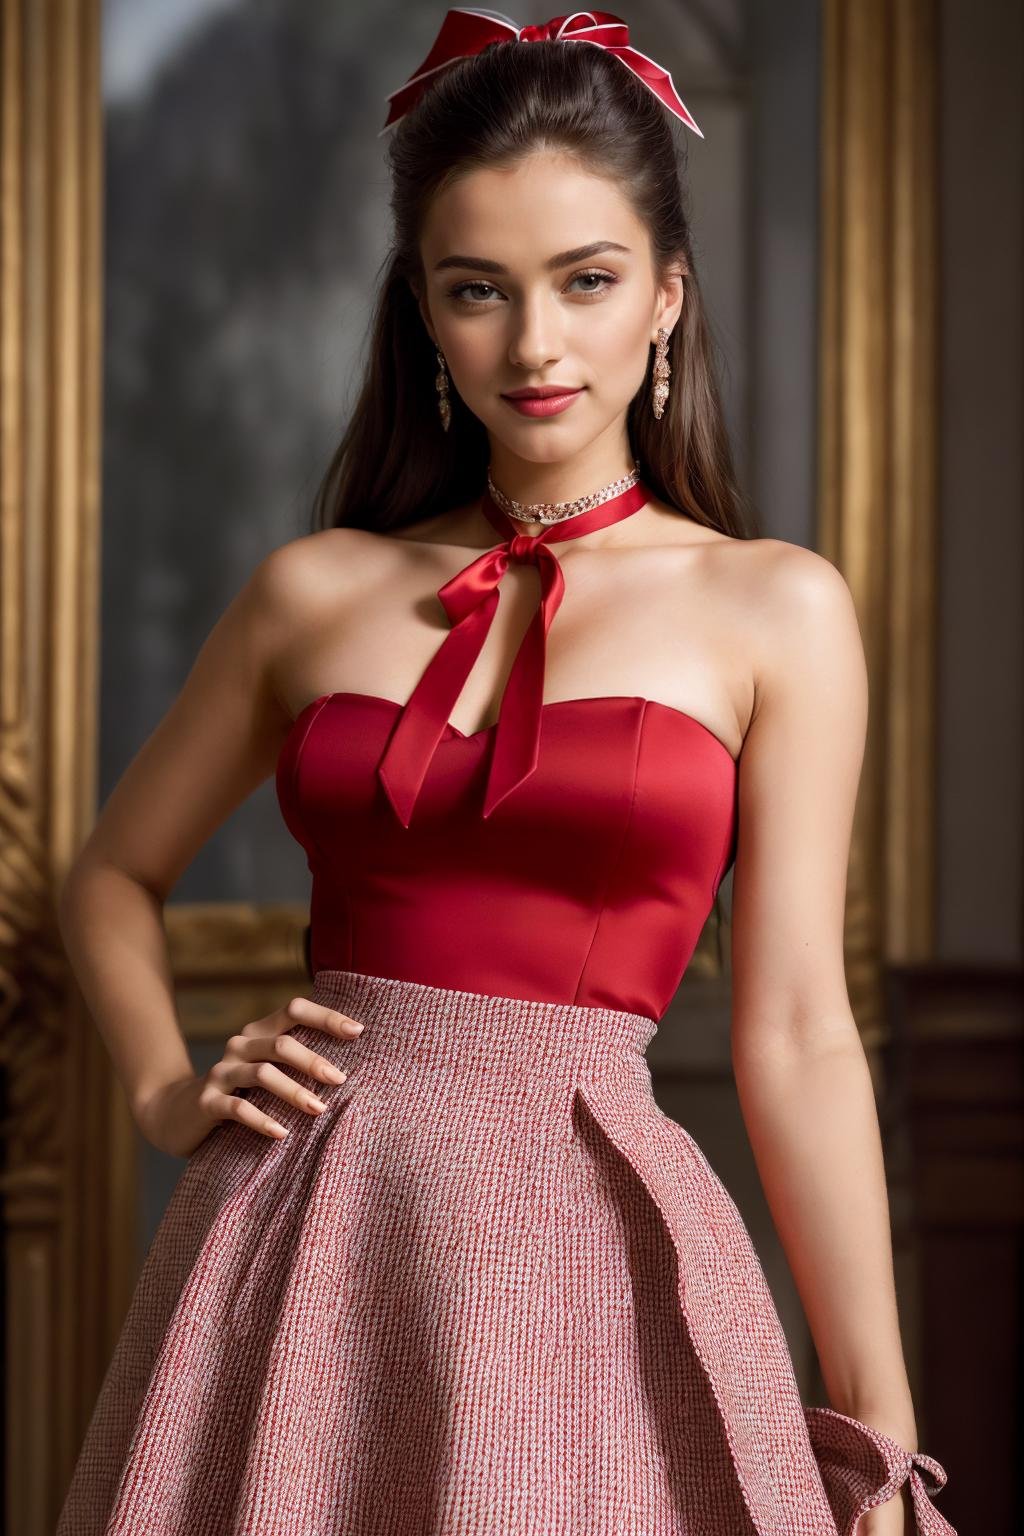 ((Masterpiece, best quality,edgQuality,photorealistic, hyper realistic)),smile--,Haute_Couture, designer edgHC_dress with set of edgPreppy clothes, a woman wearing a red ribbon choker and a plaid skirt,hand on hip <lora:edgLycorisPreppy:1>